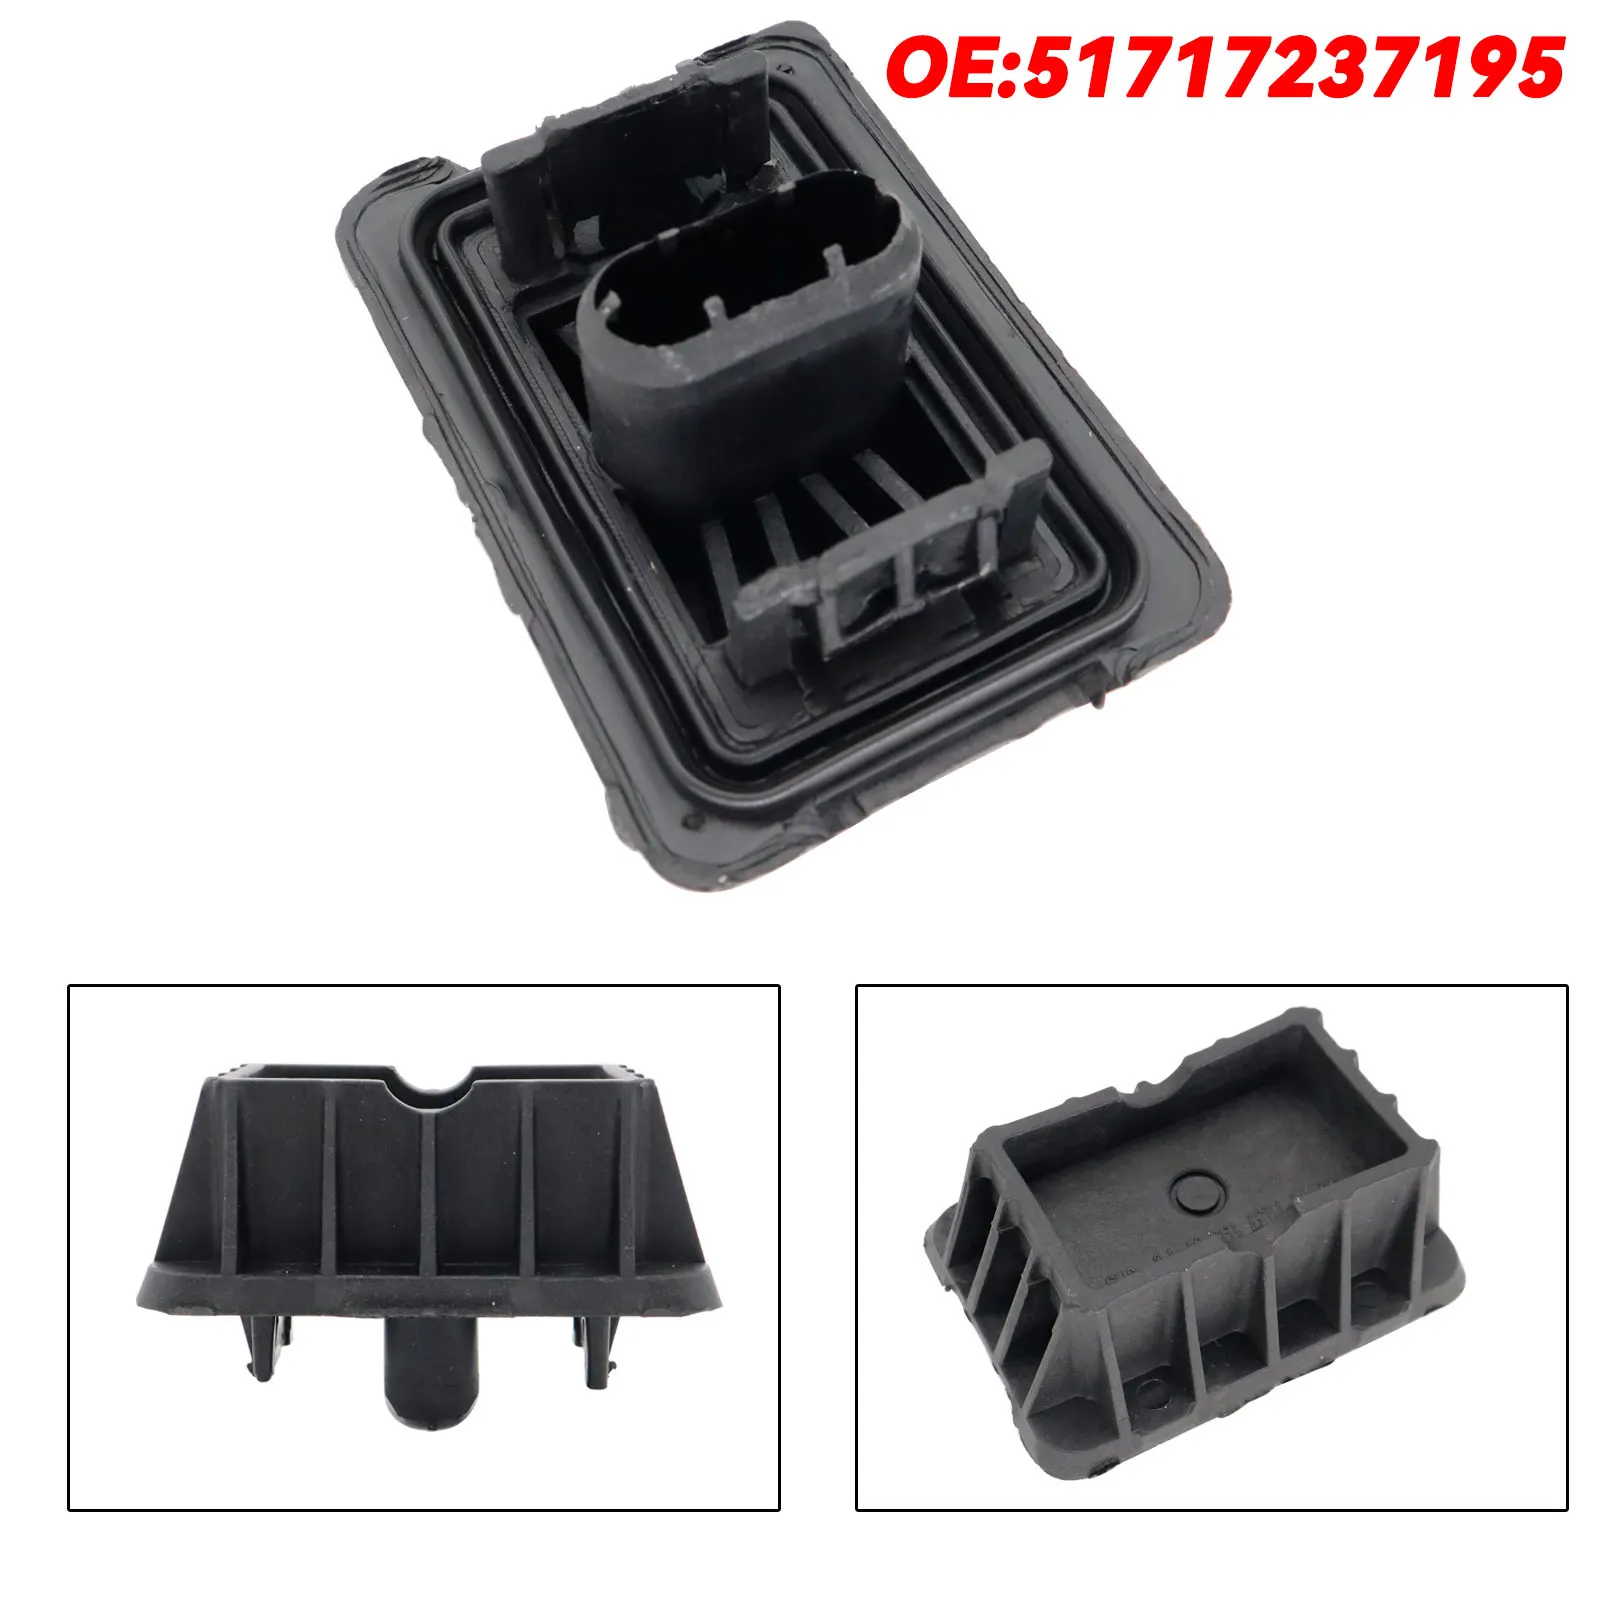 

51717237195 Car Jack Pad Under Support Pad Lifting for BMW 1 3 5 6 7 Ser X1 E81 E82 E87 E91 E90 E60 F10 F13 F01 F06 F07 F02 E84